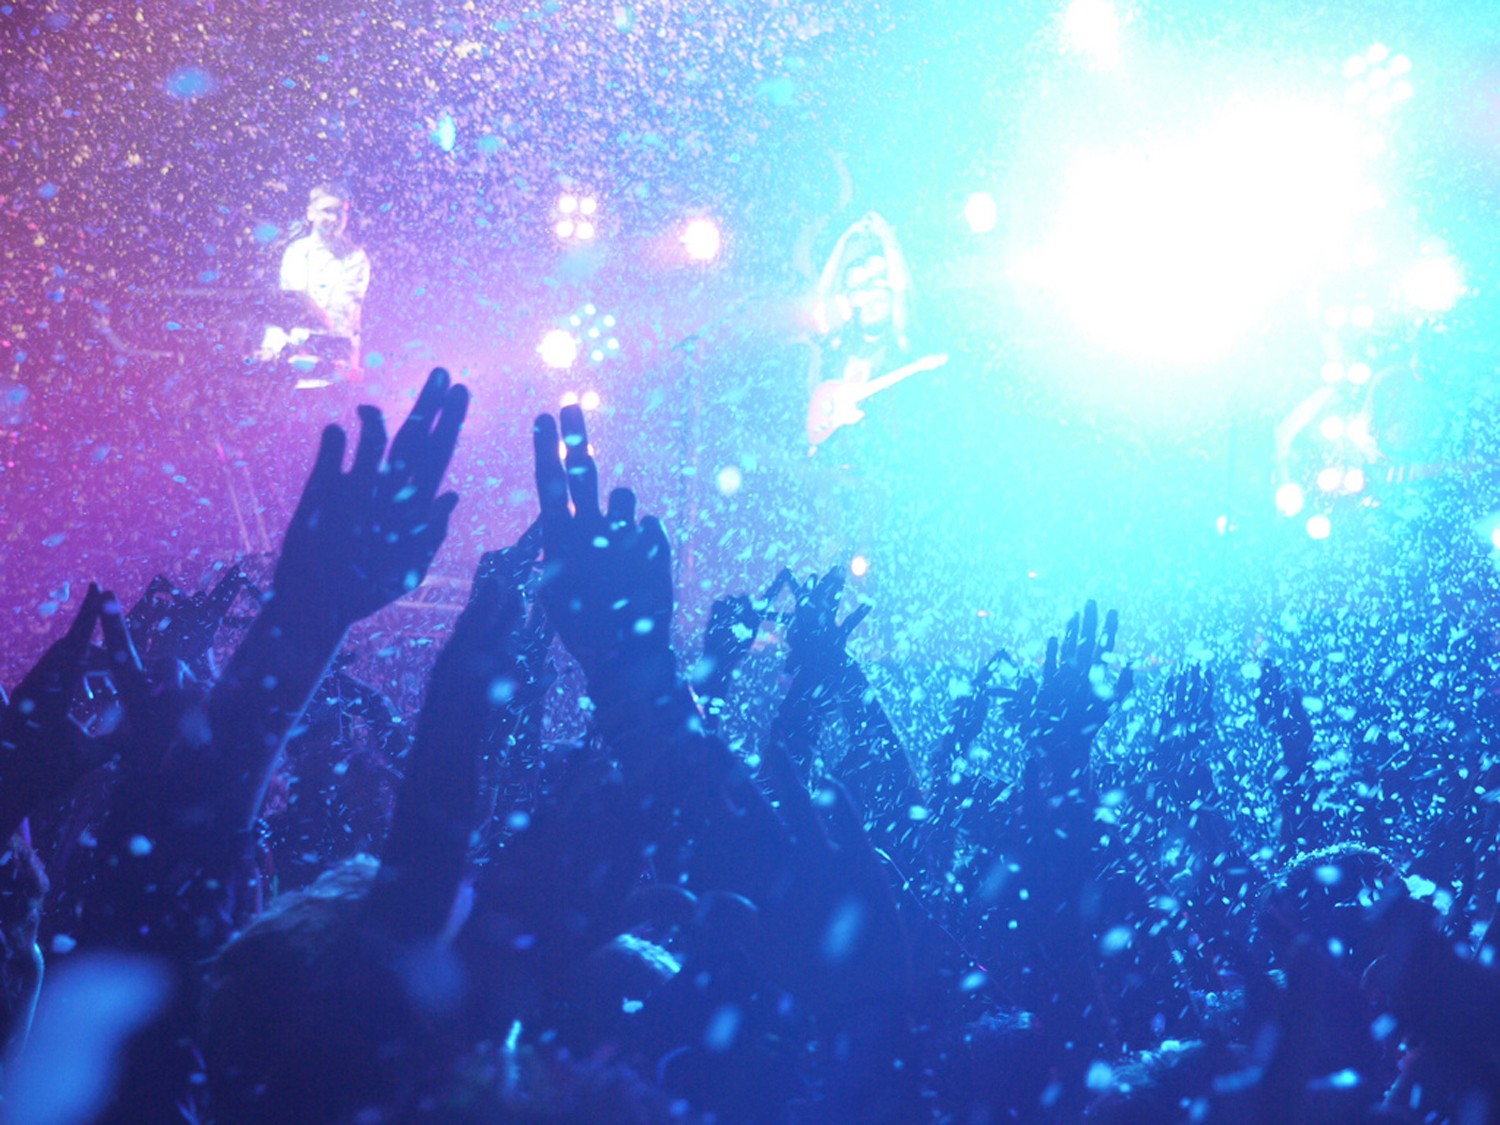 Alt J Gig with Falling Snow Machine Hire from FX Live, Eco Friendly Artificial Snow for events